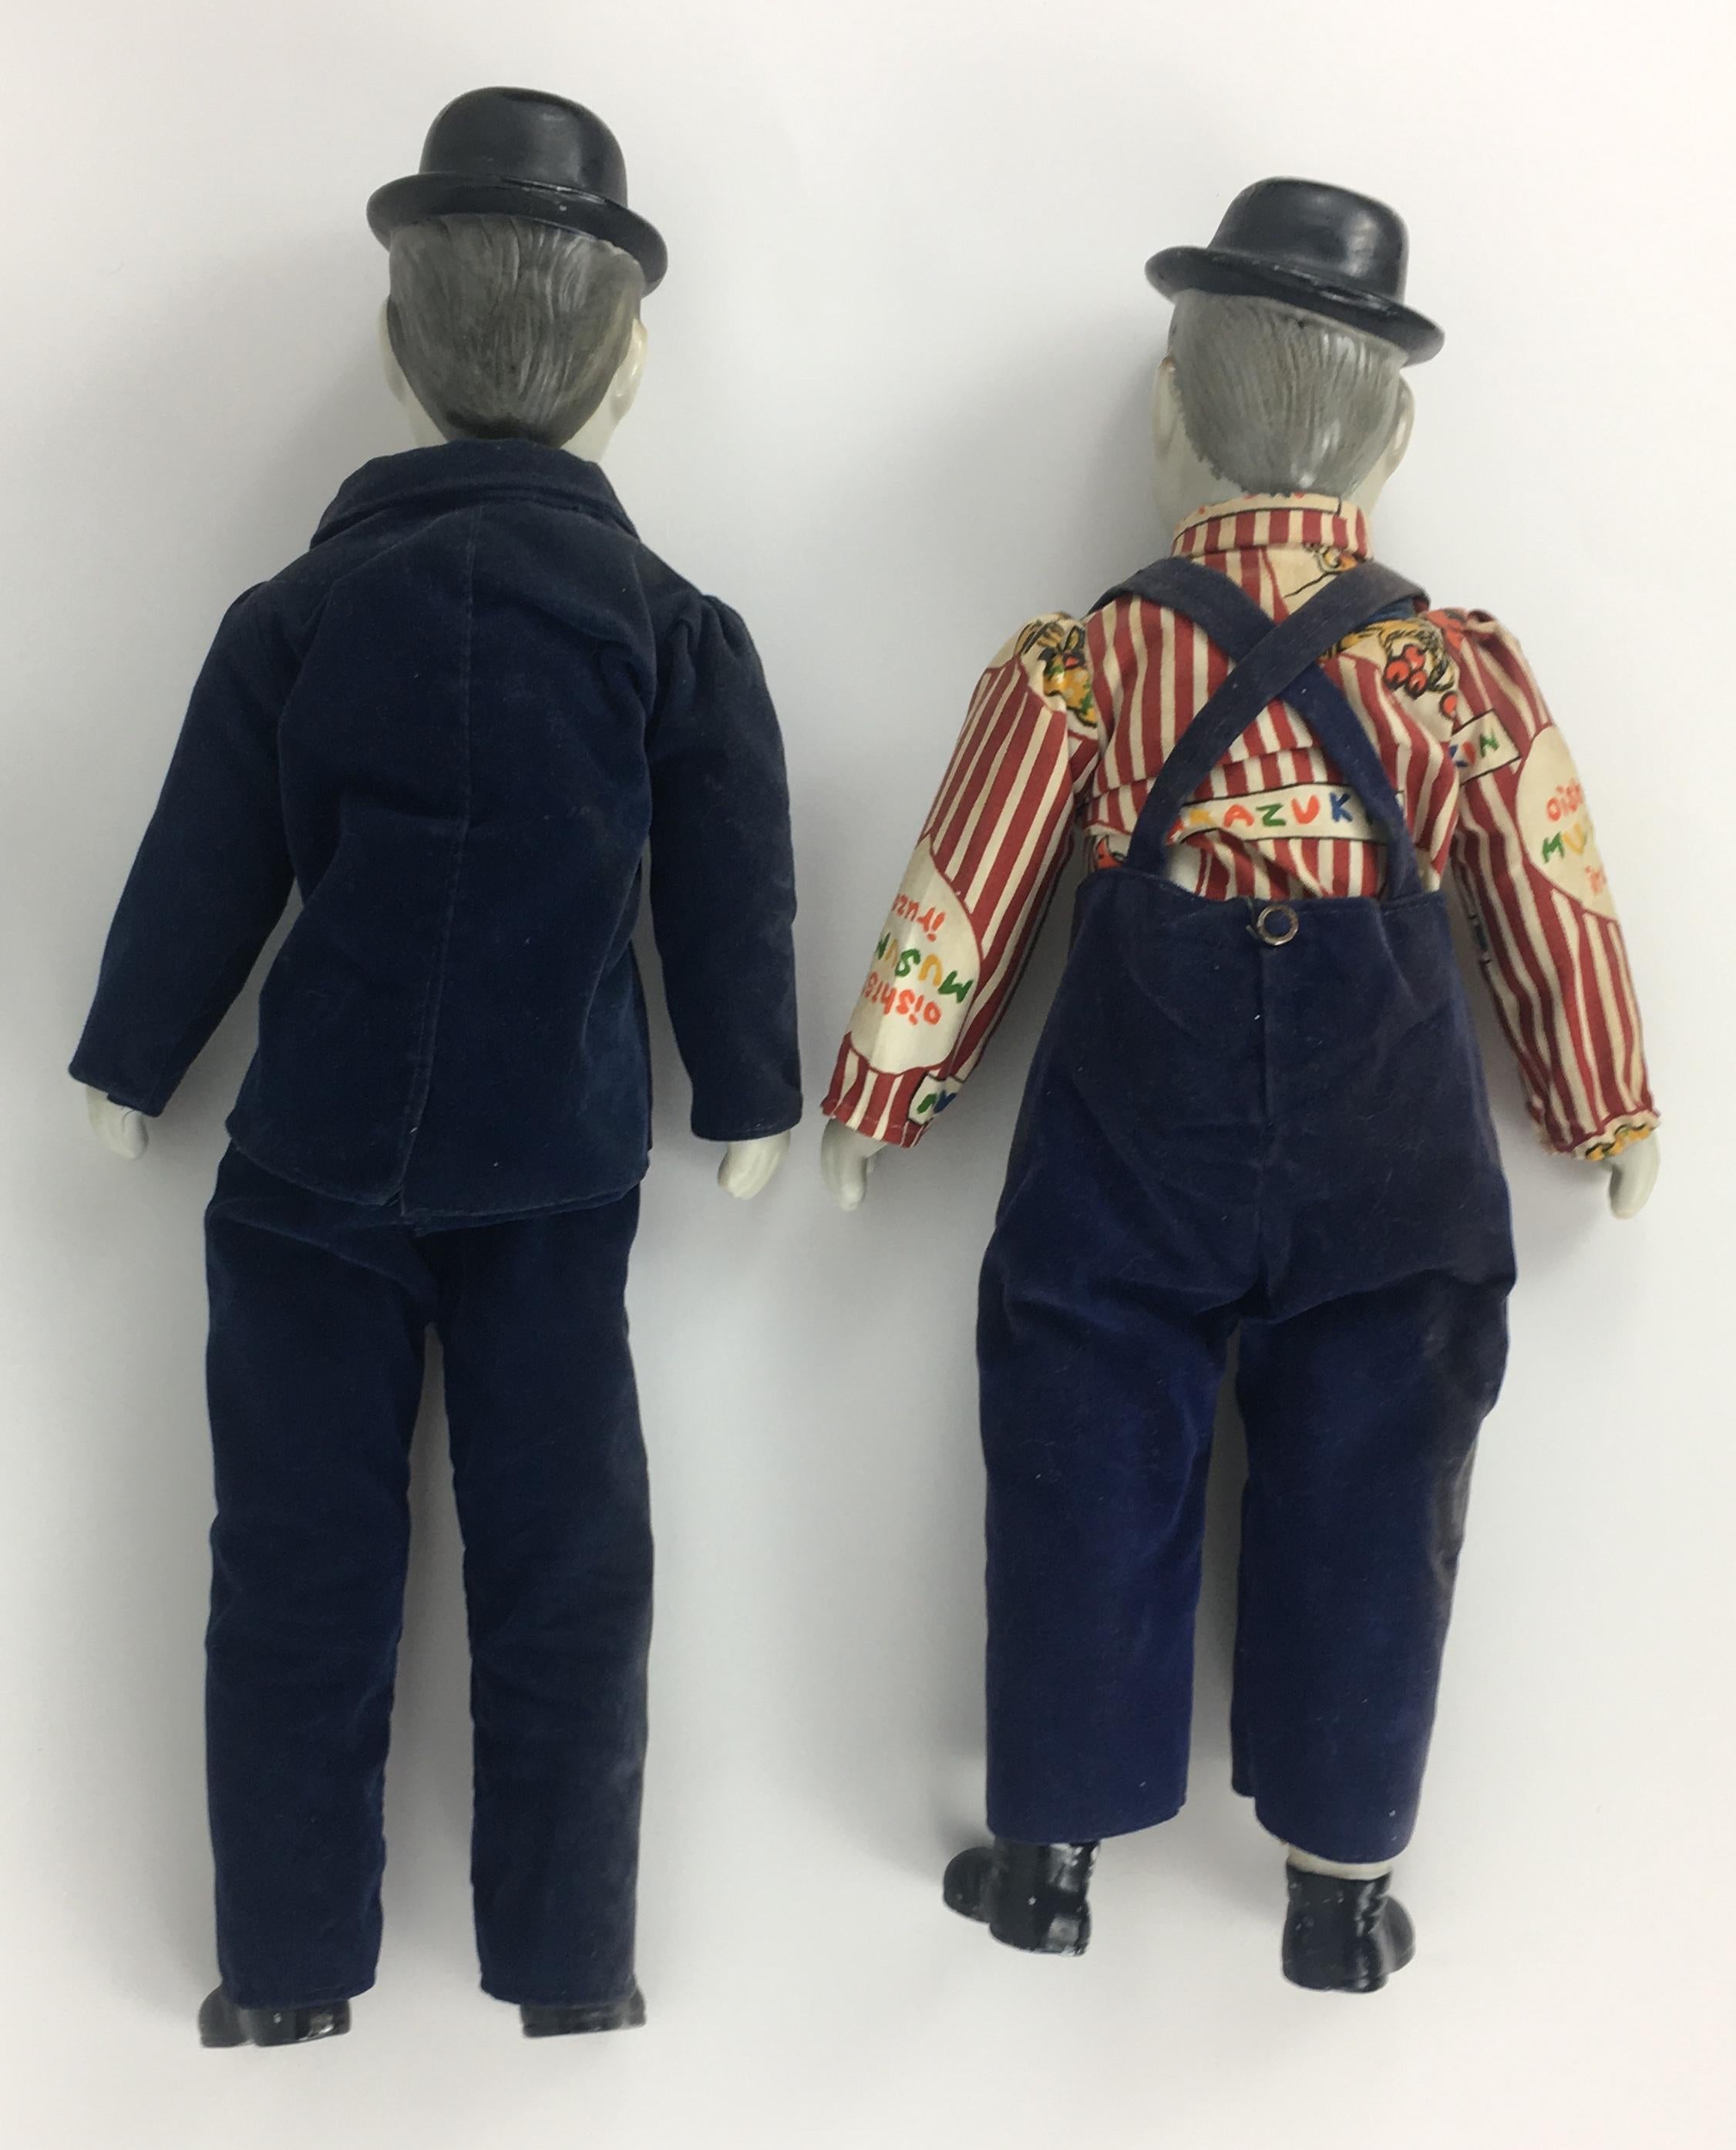 laurel and hardy dolls value